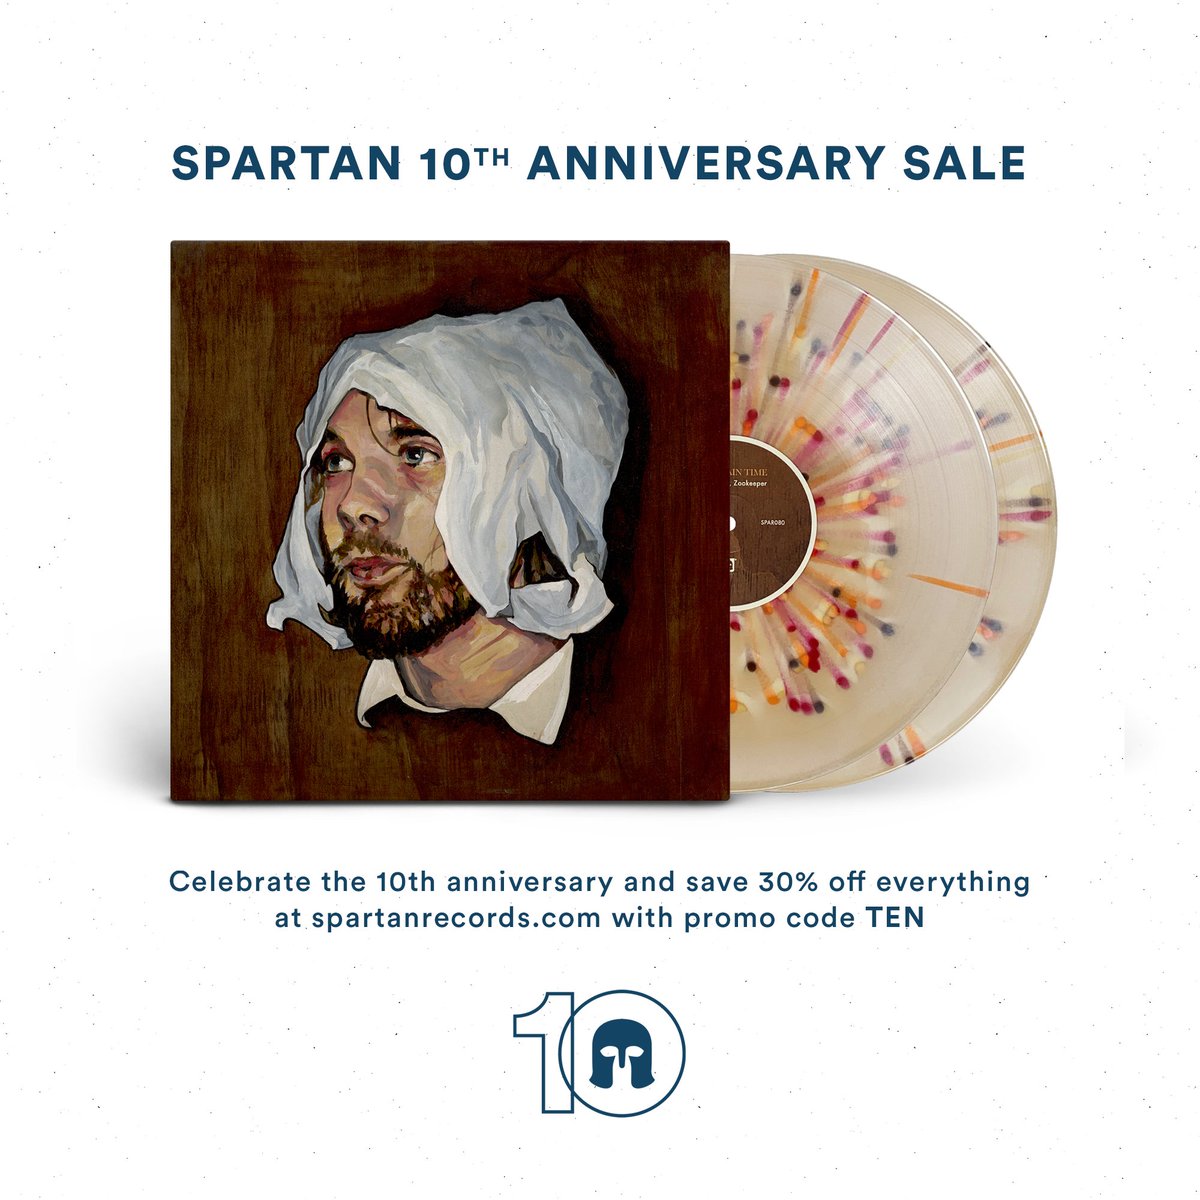 It's @spartanrecords 10th anniversary and everything is 30% off at spartanrecords.com, including the 'Saint Francis, Zookeeper' 2xLP. There are also a limited number of test pressings available, including the sold out 'Music For Looking Animals' album. Sale ends 1/3!